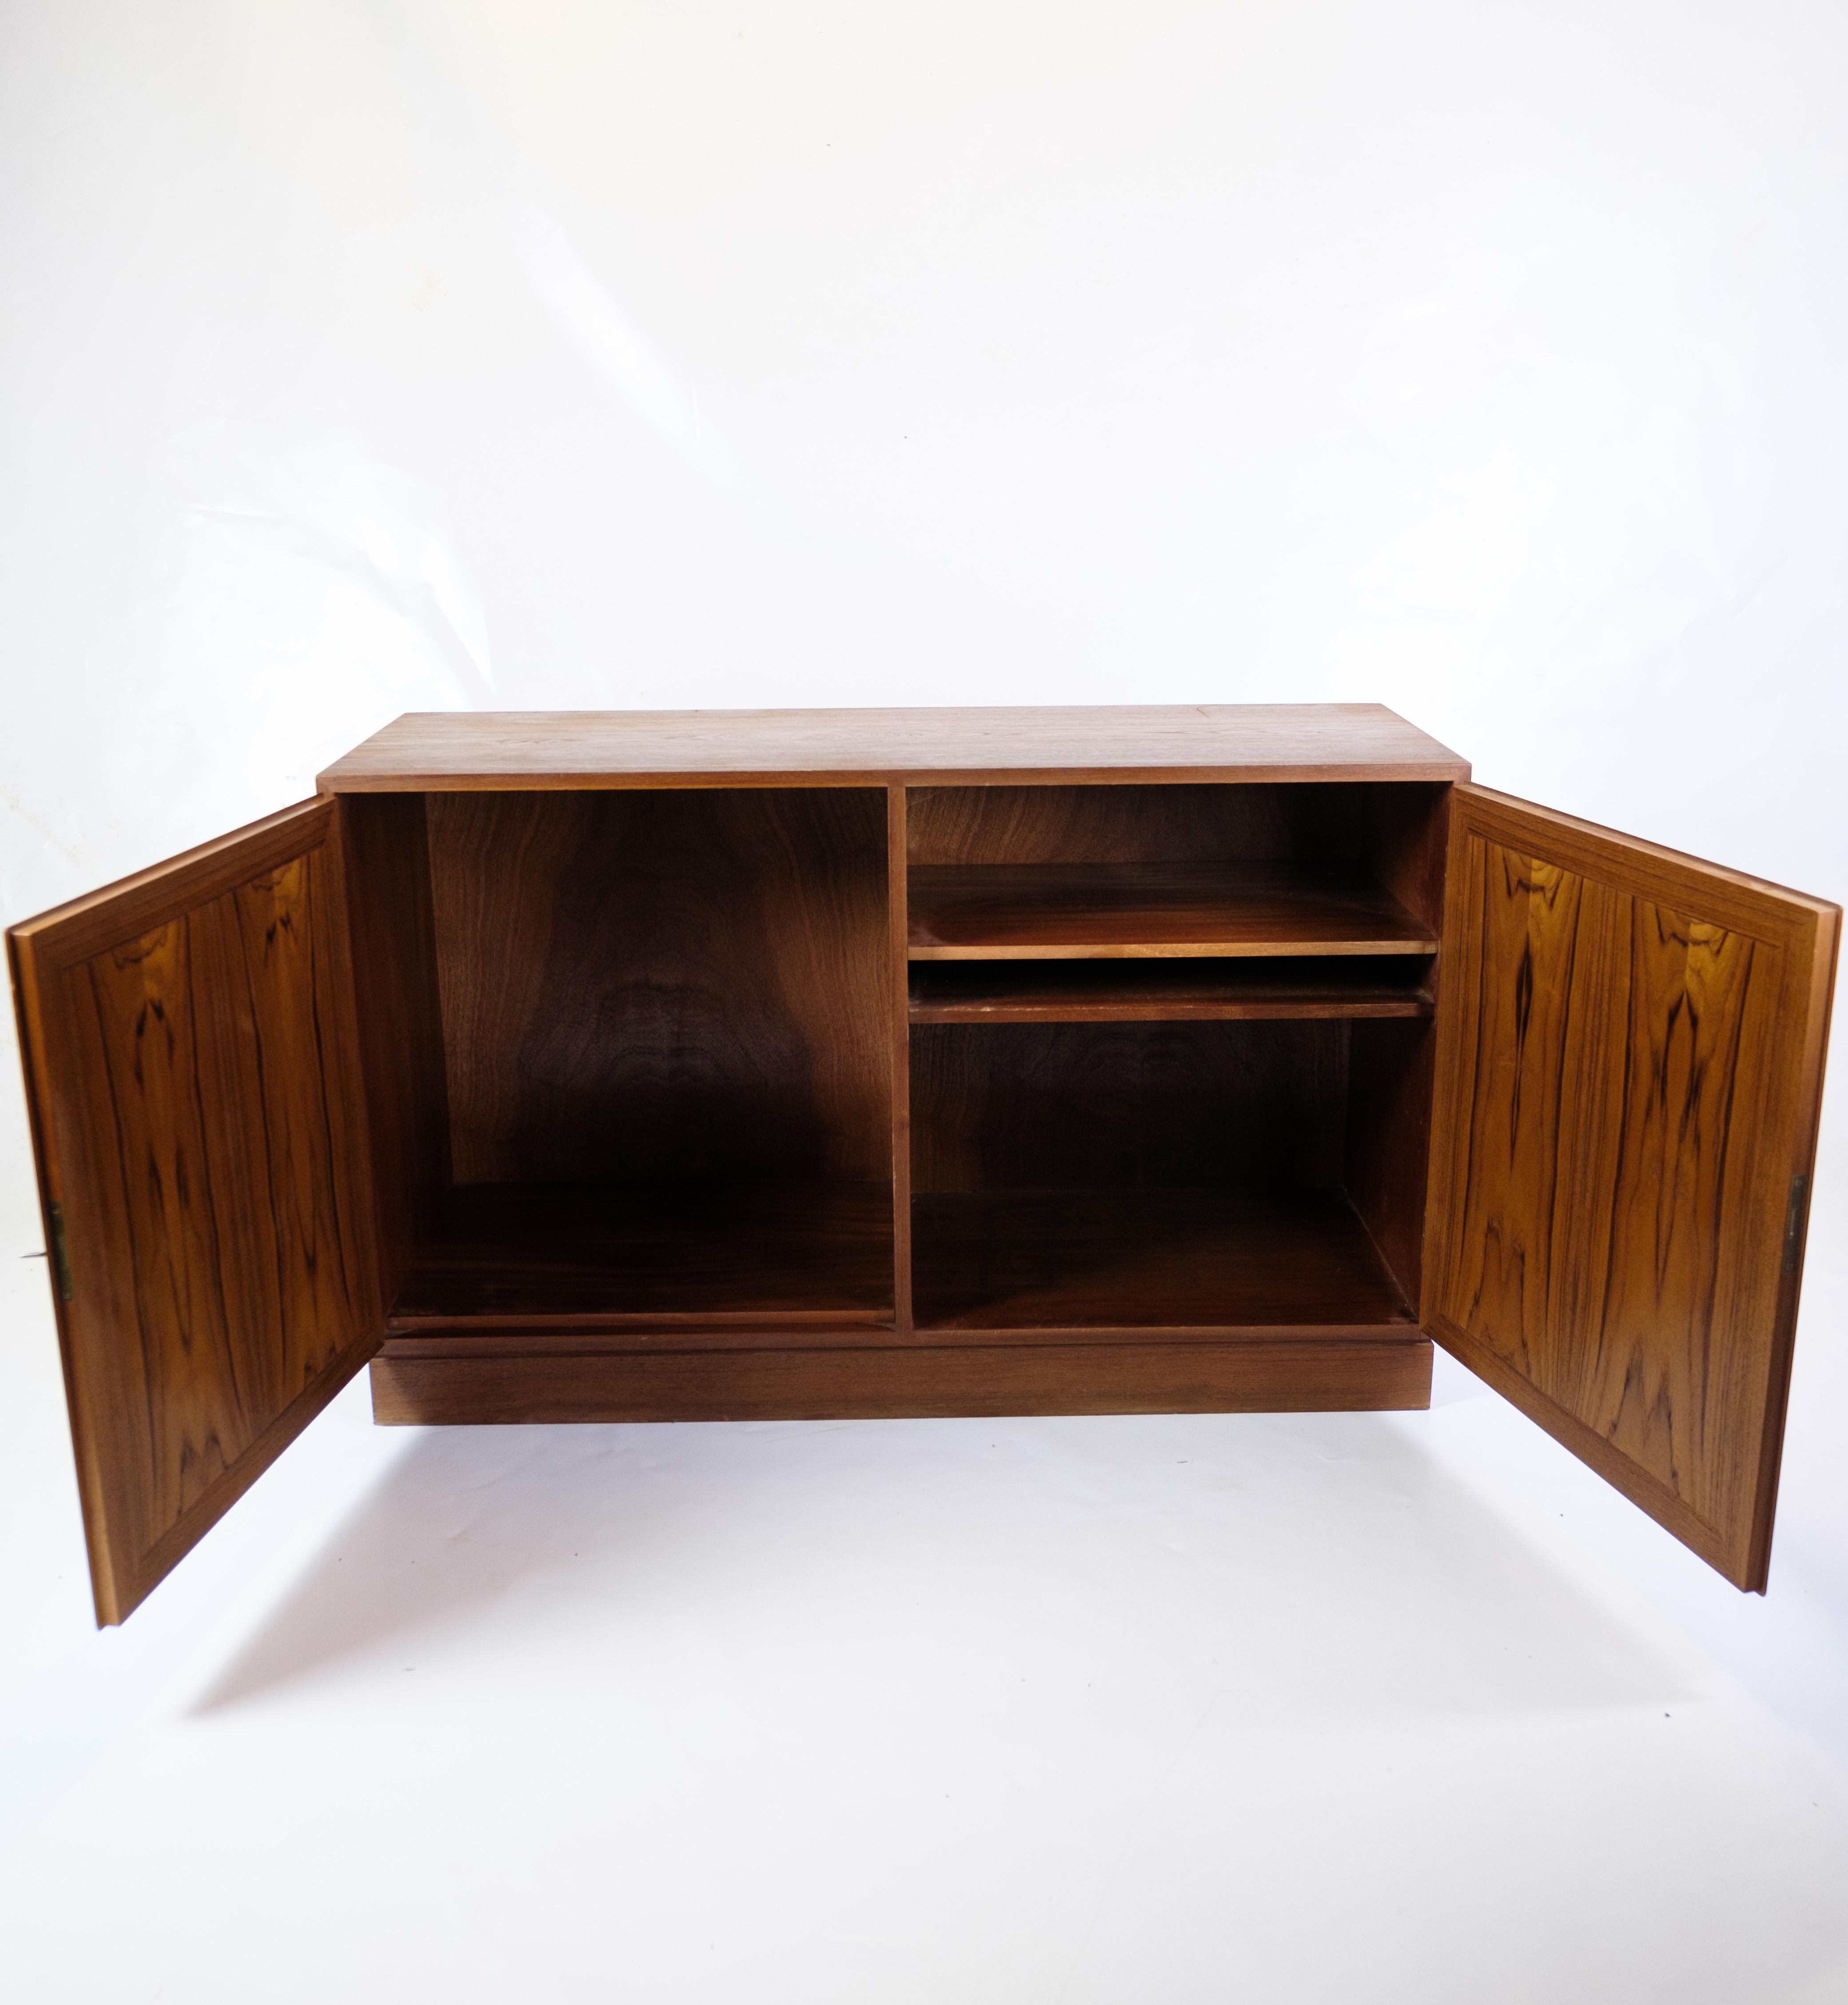 Mid-20th Century Smaill Side Board Made In Teak, Danish Design From 1960s For Sale